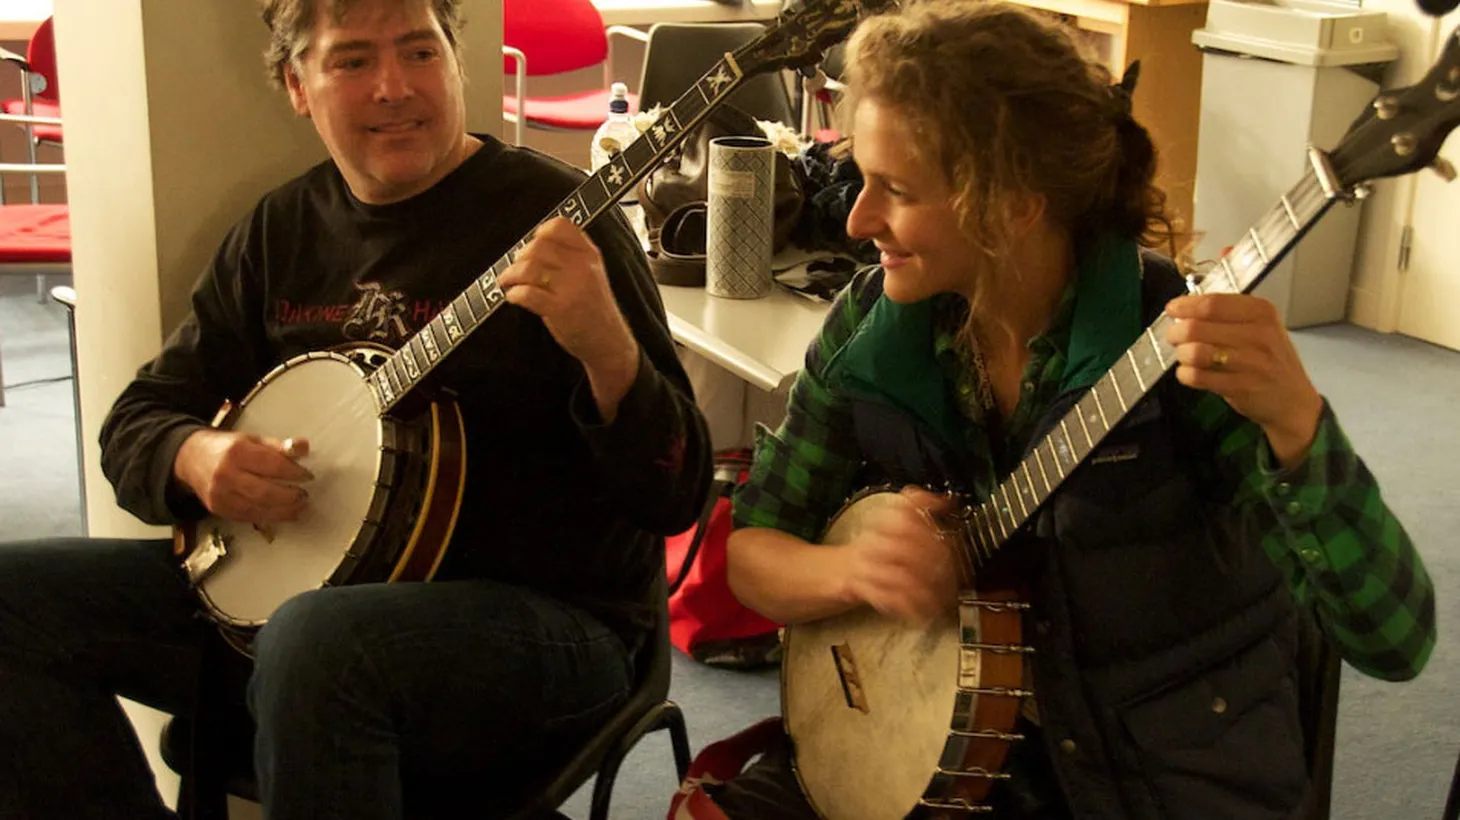 Married banjo wizards Béla Fleck and Abigail Washburn perform songs from their first album together.